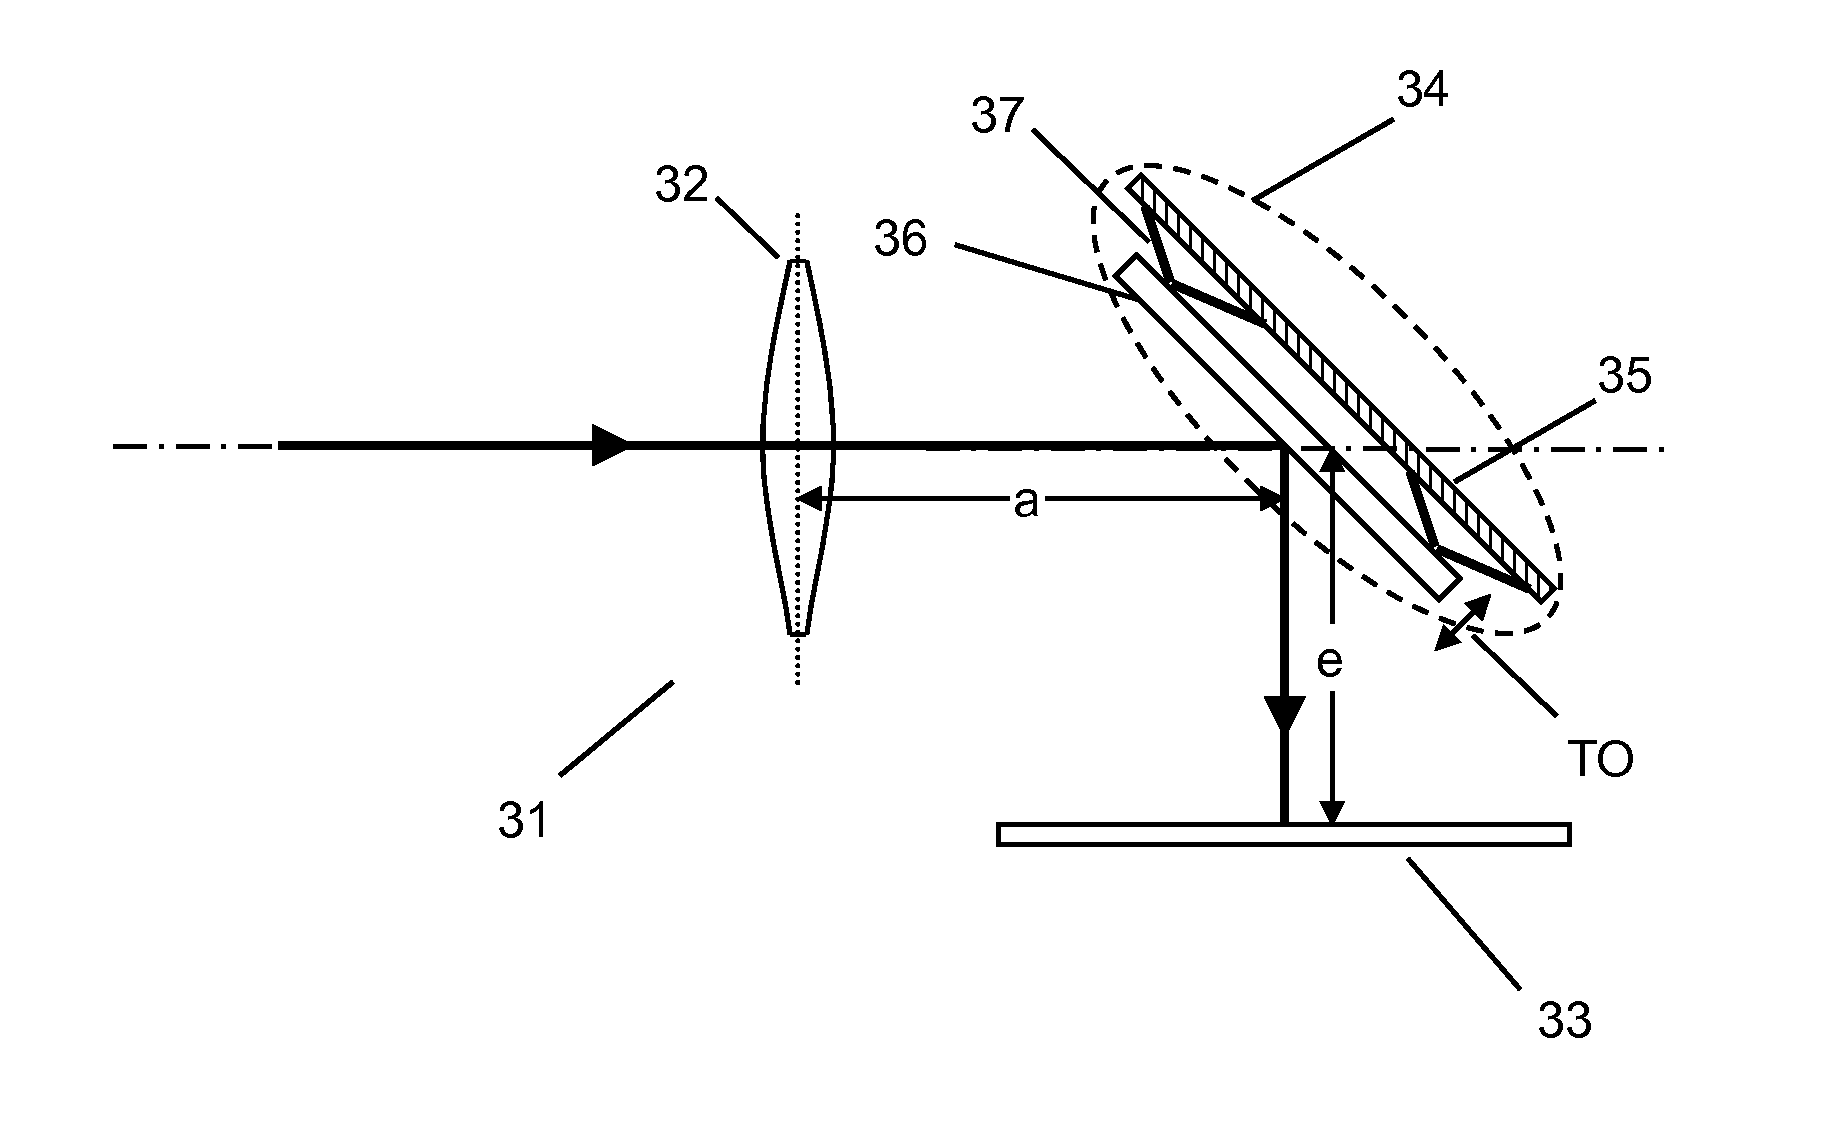 Automatic focus imaging system using out-of-plane translation of an MEMS reflective surface